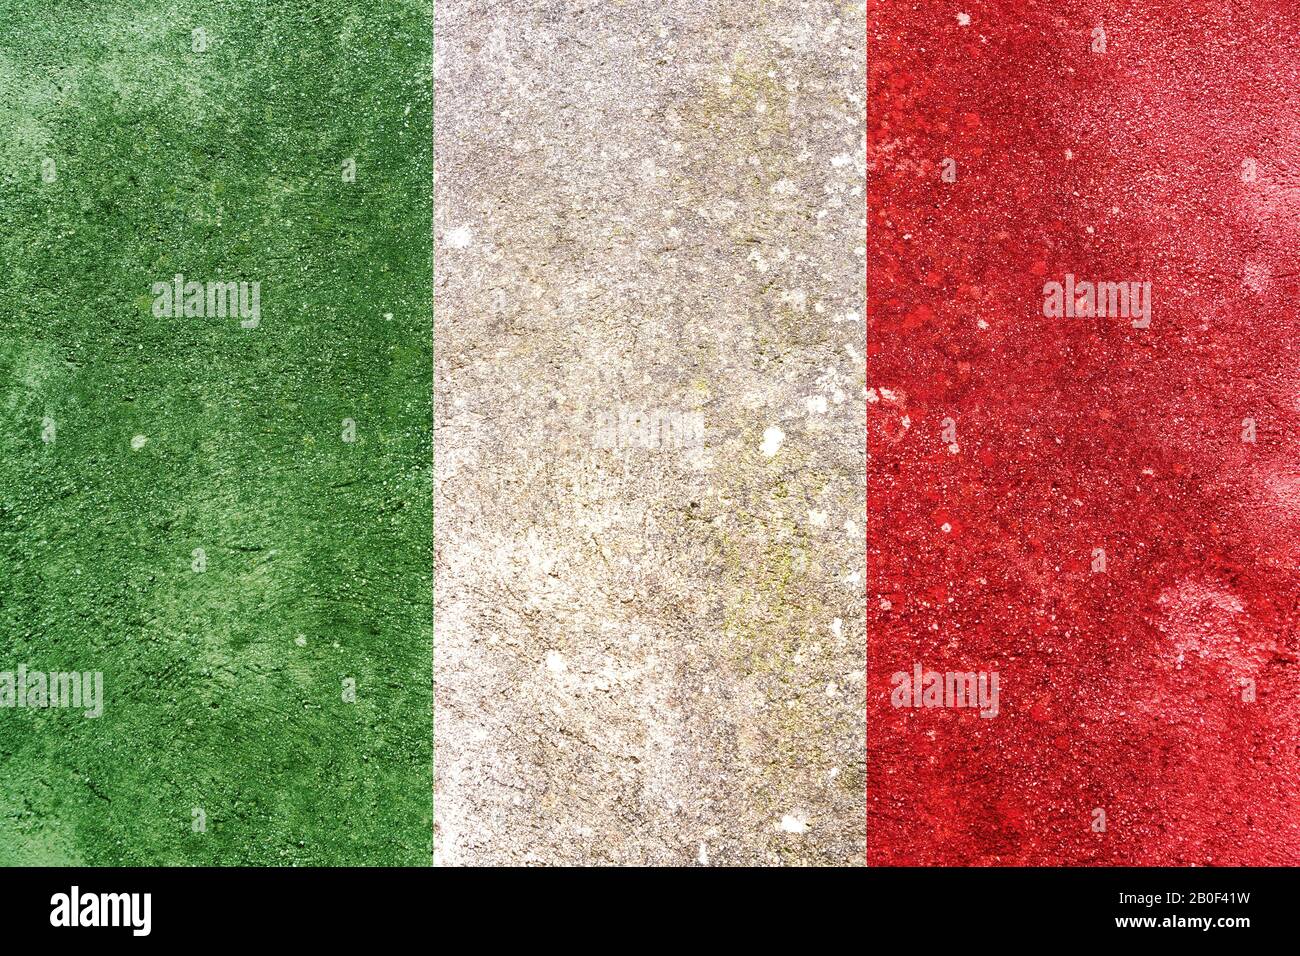 Italy flag on wall. Italian flag painted on a grunge dirty wall. Italy, italian language and culture concept Stock Photo